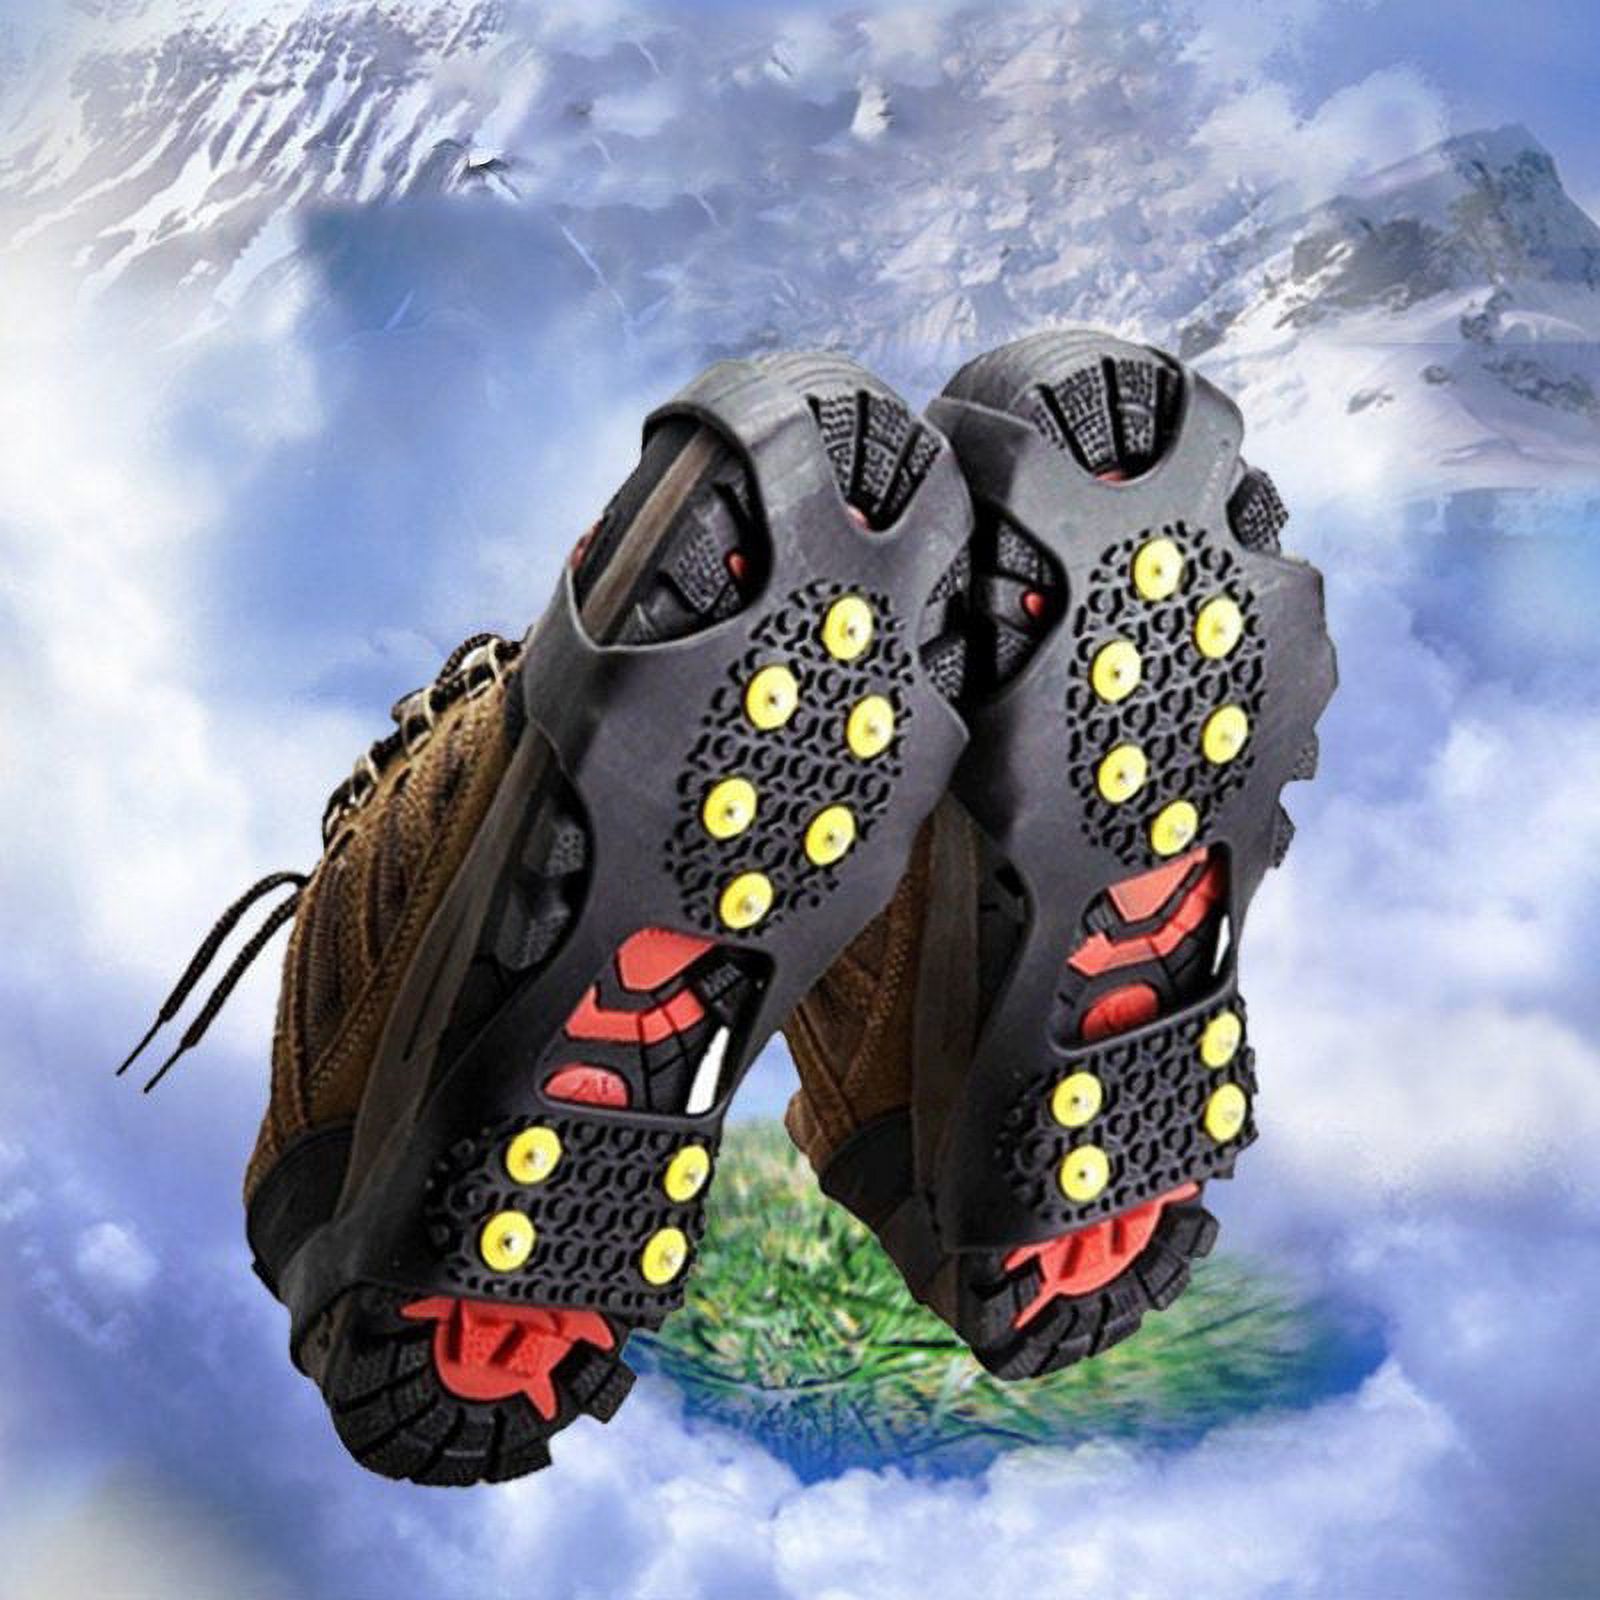 1 Pair 10 Studs Anti-Skid Snow Ice Climbing Shoe Grips Crampons Cleats Overshoes crampons spike shoes crampon - image 2 of 6